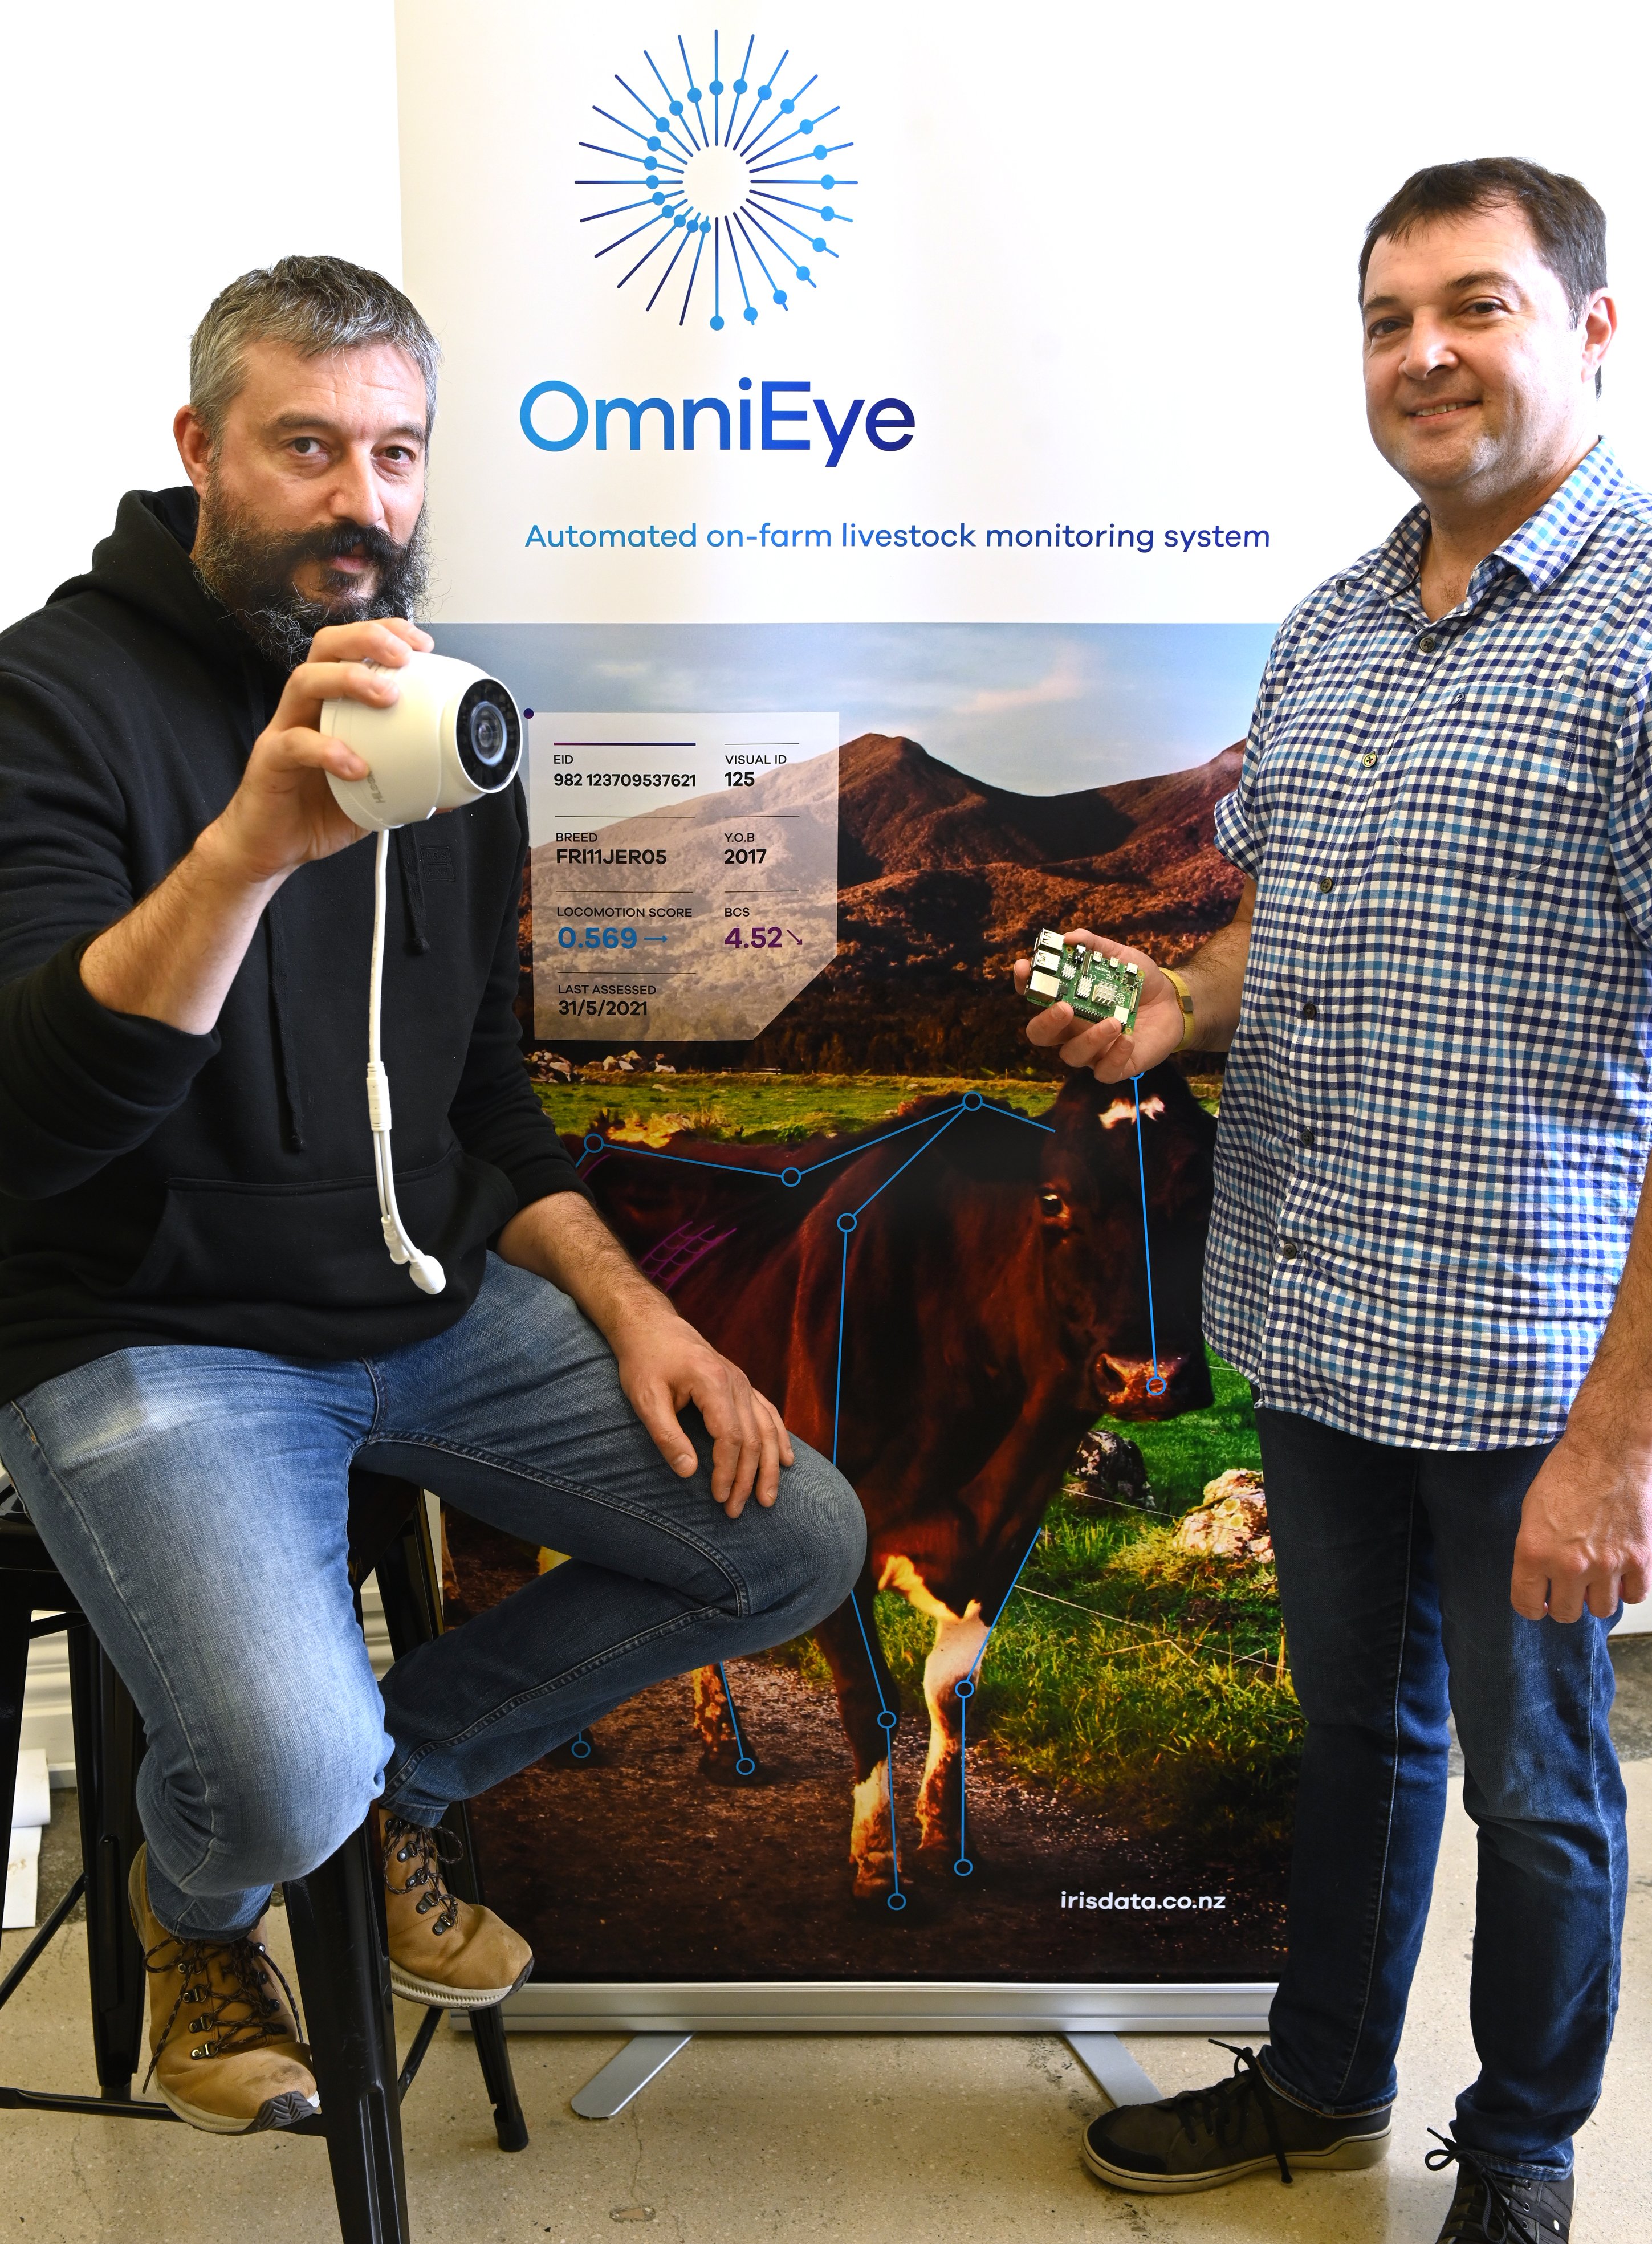 OmniEye chief technology officer Benoit Auvray (left) with the company’s new lameness detection...